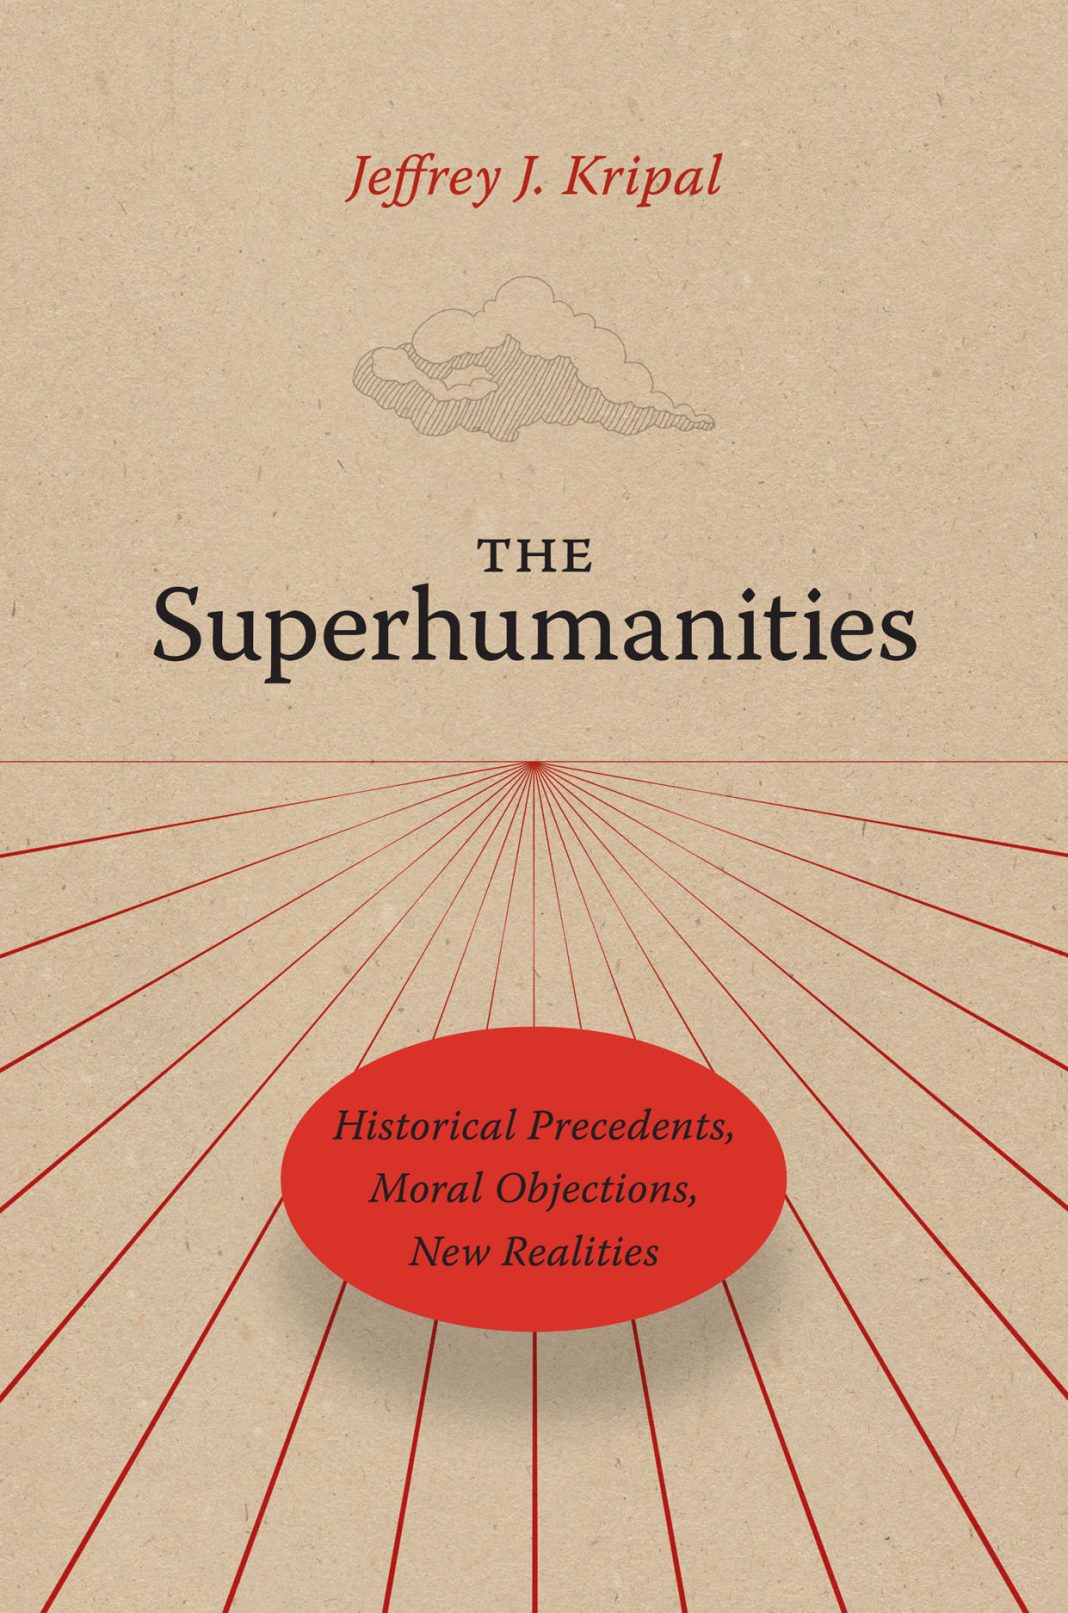 we-are-superhuman,-a-guest-post-from-jeffrey-j.-kripal,-author-of-“the-superhumanities”